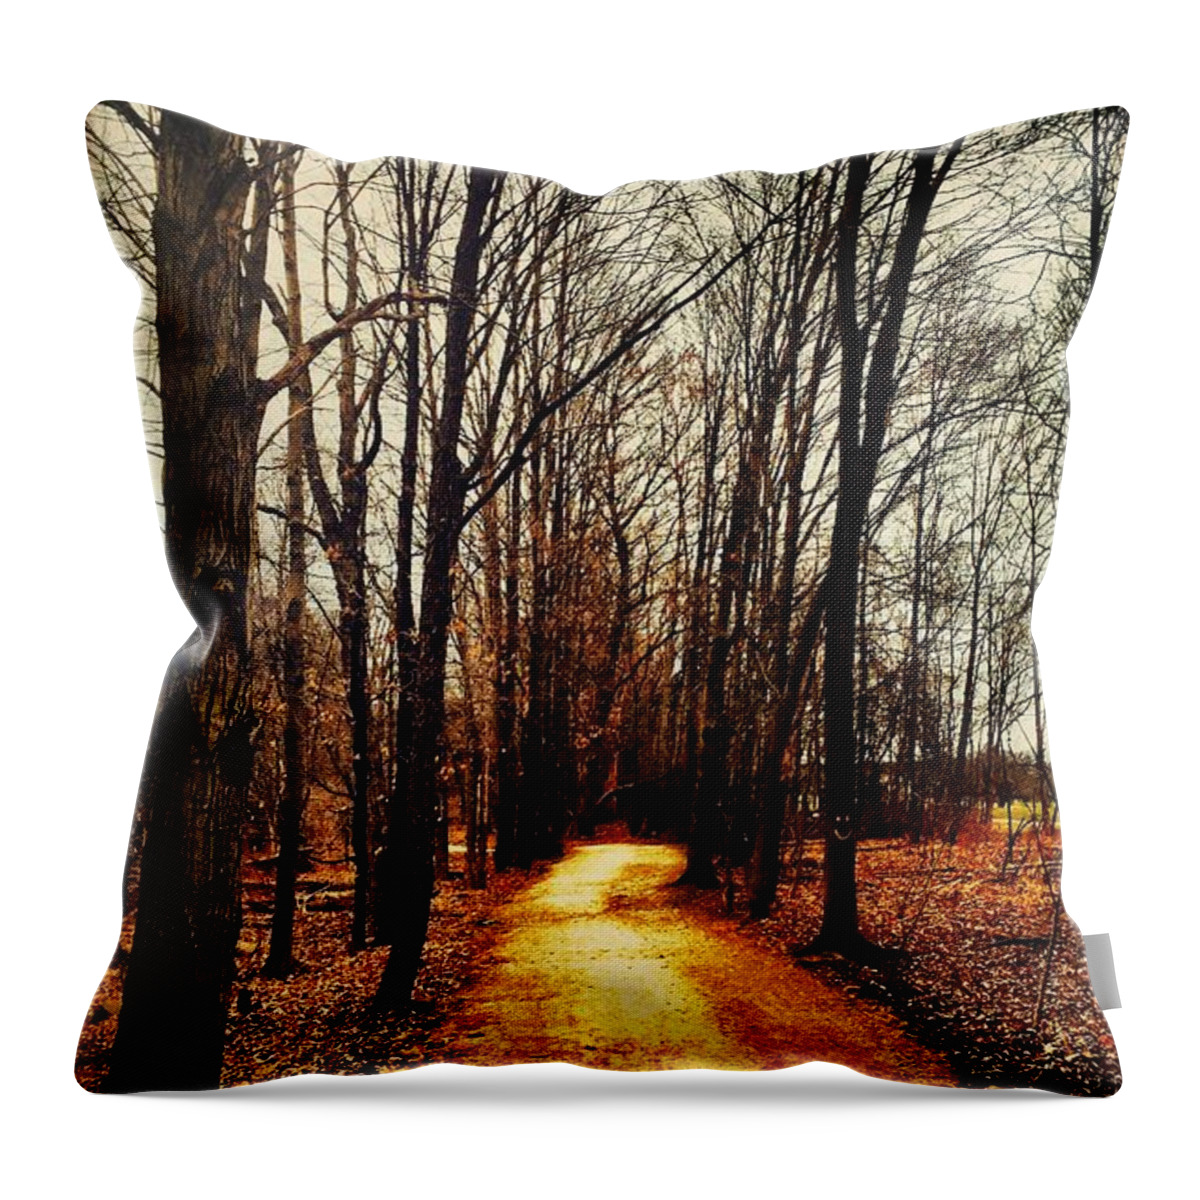 Fall Throw Pillow featuring the photograph Autumn Path by Drue DeMatteis